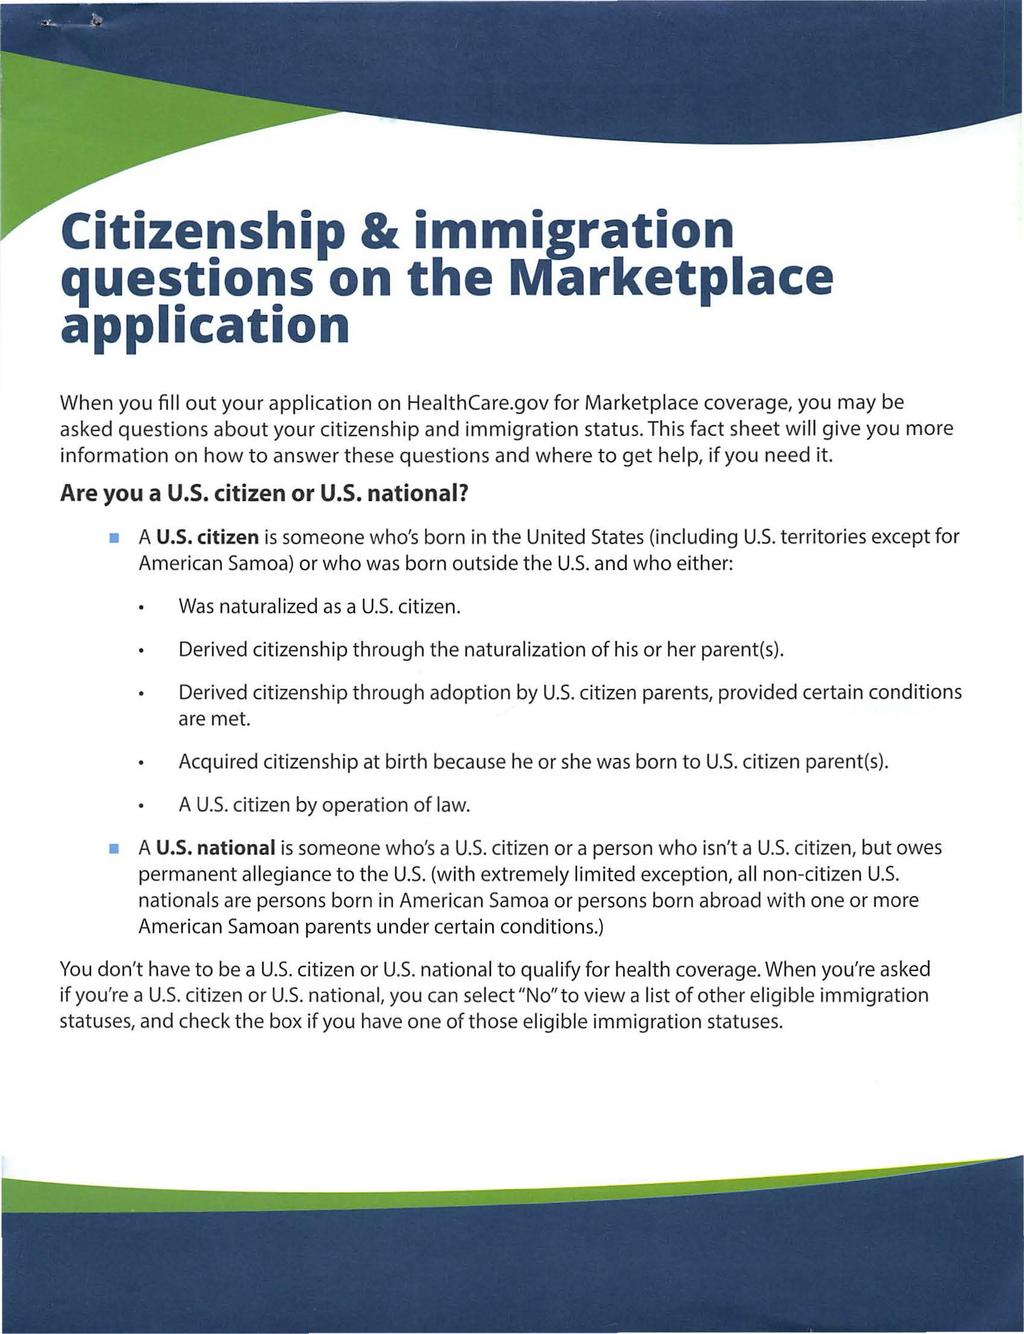 Citizenship & immigration questions on the ~arketplace application When you fill out your application on HealthCare.